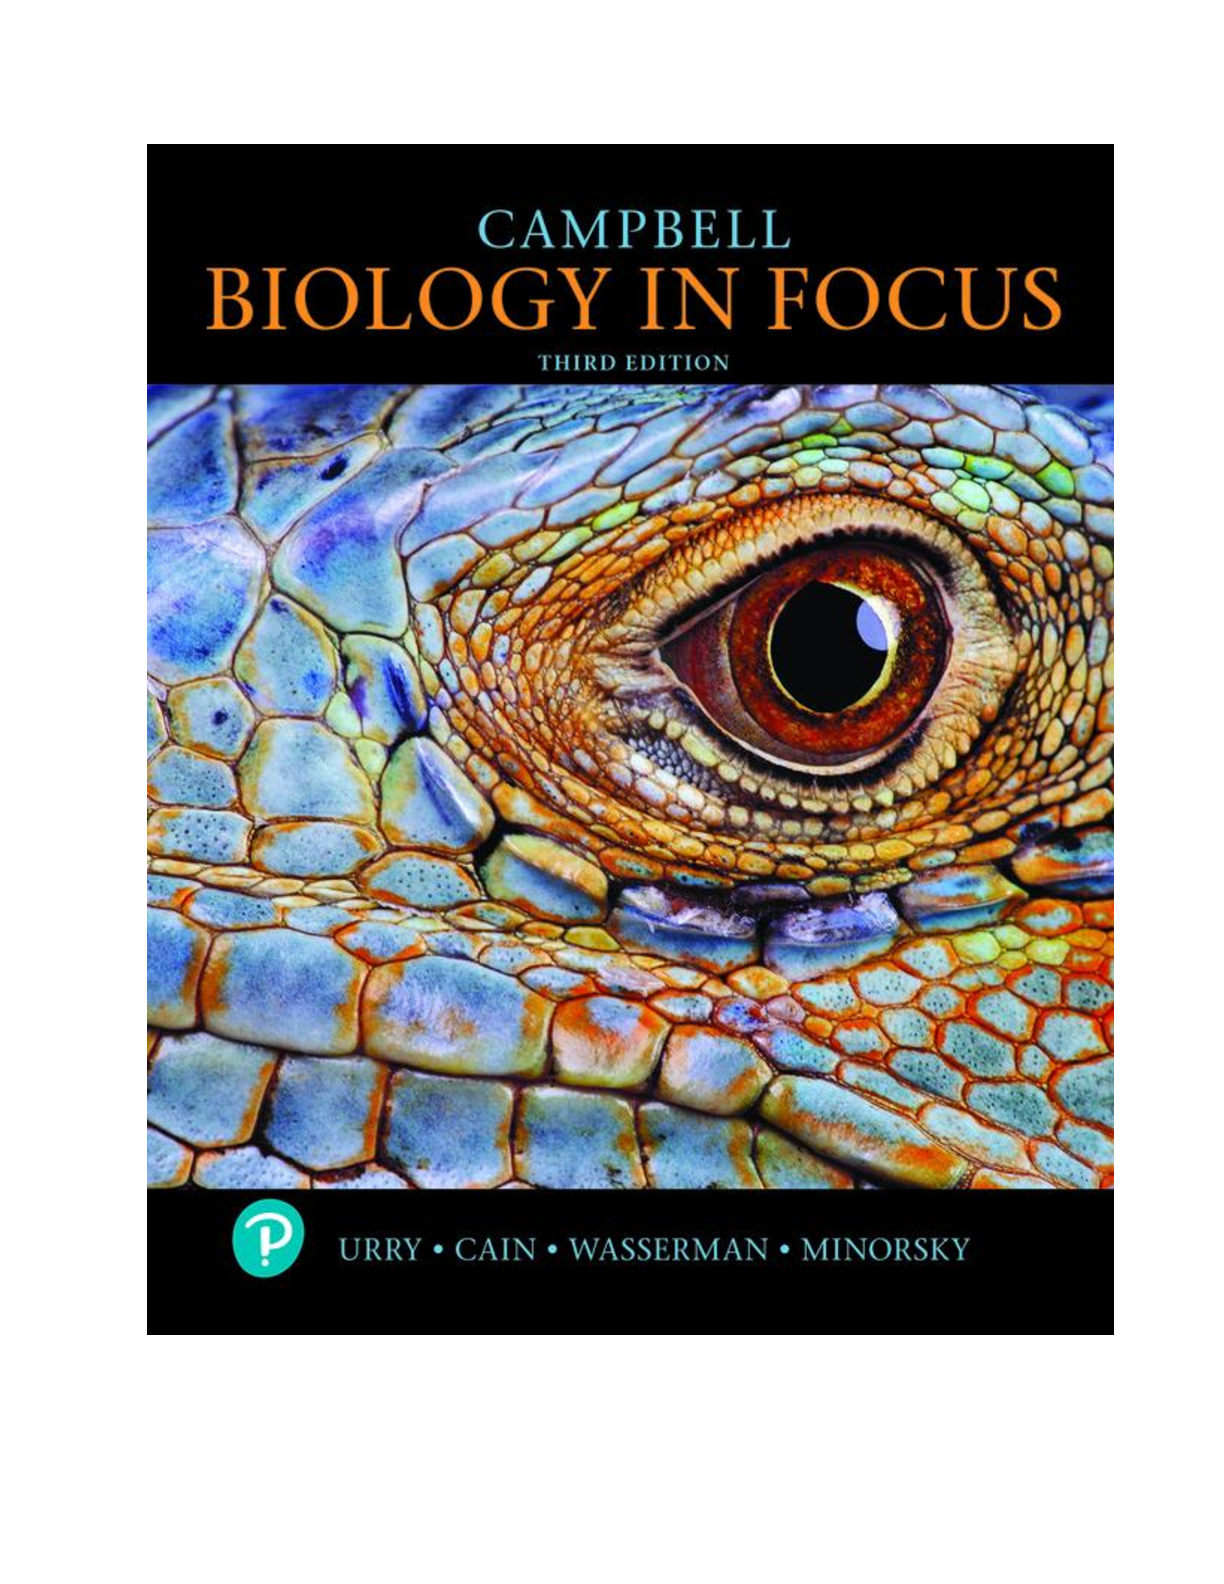 campbell biology in focus pdf download